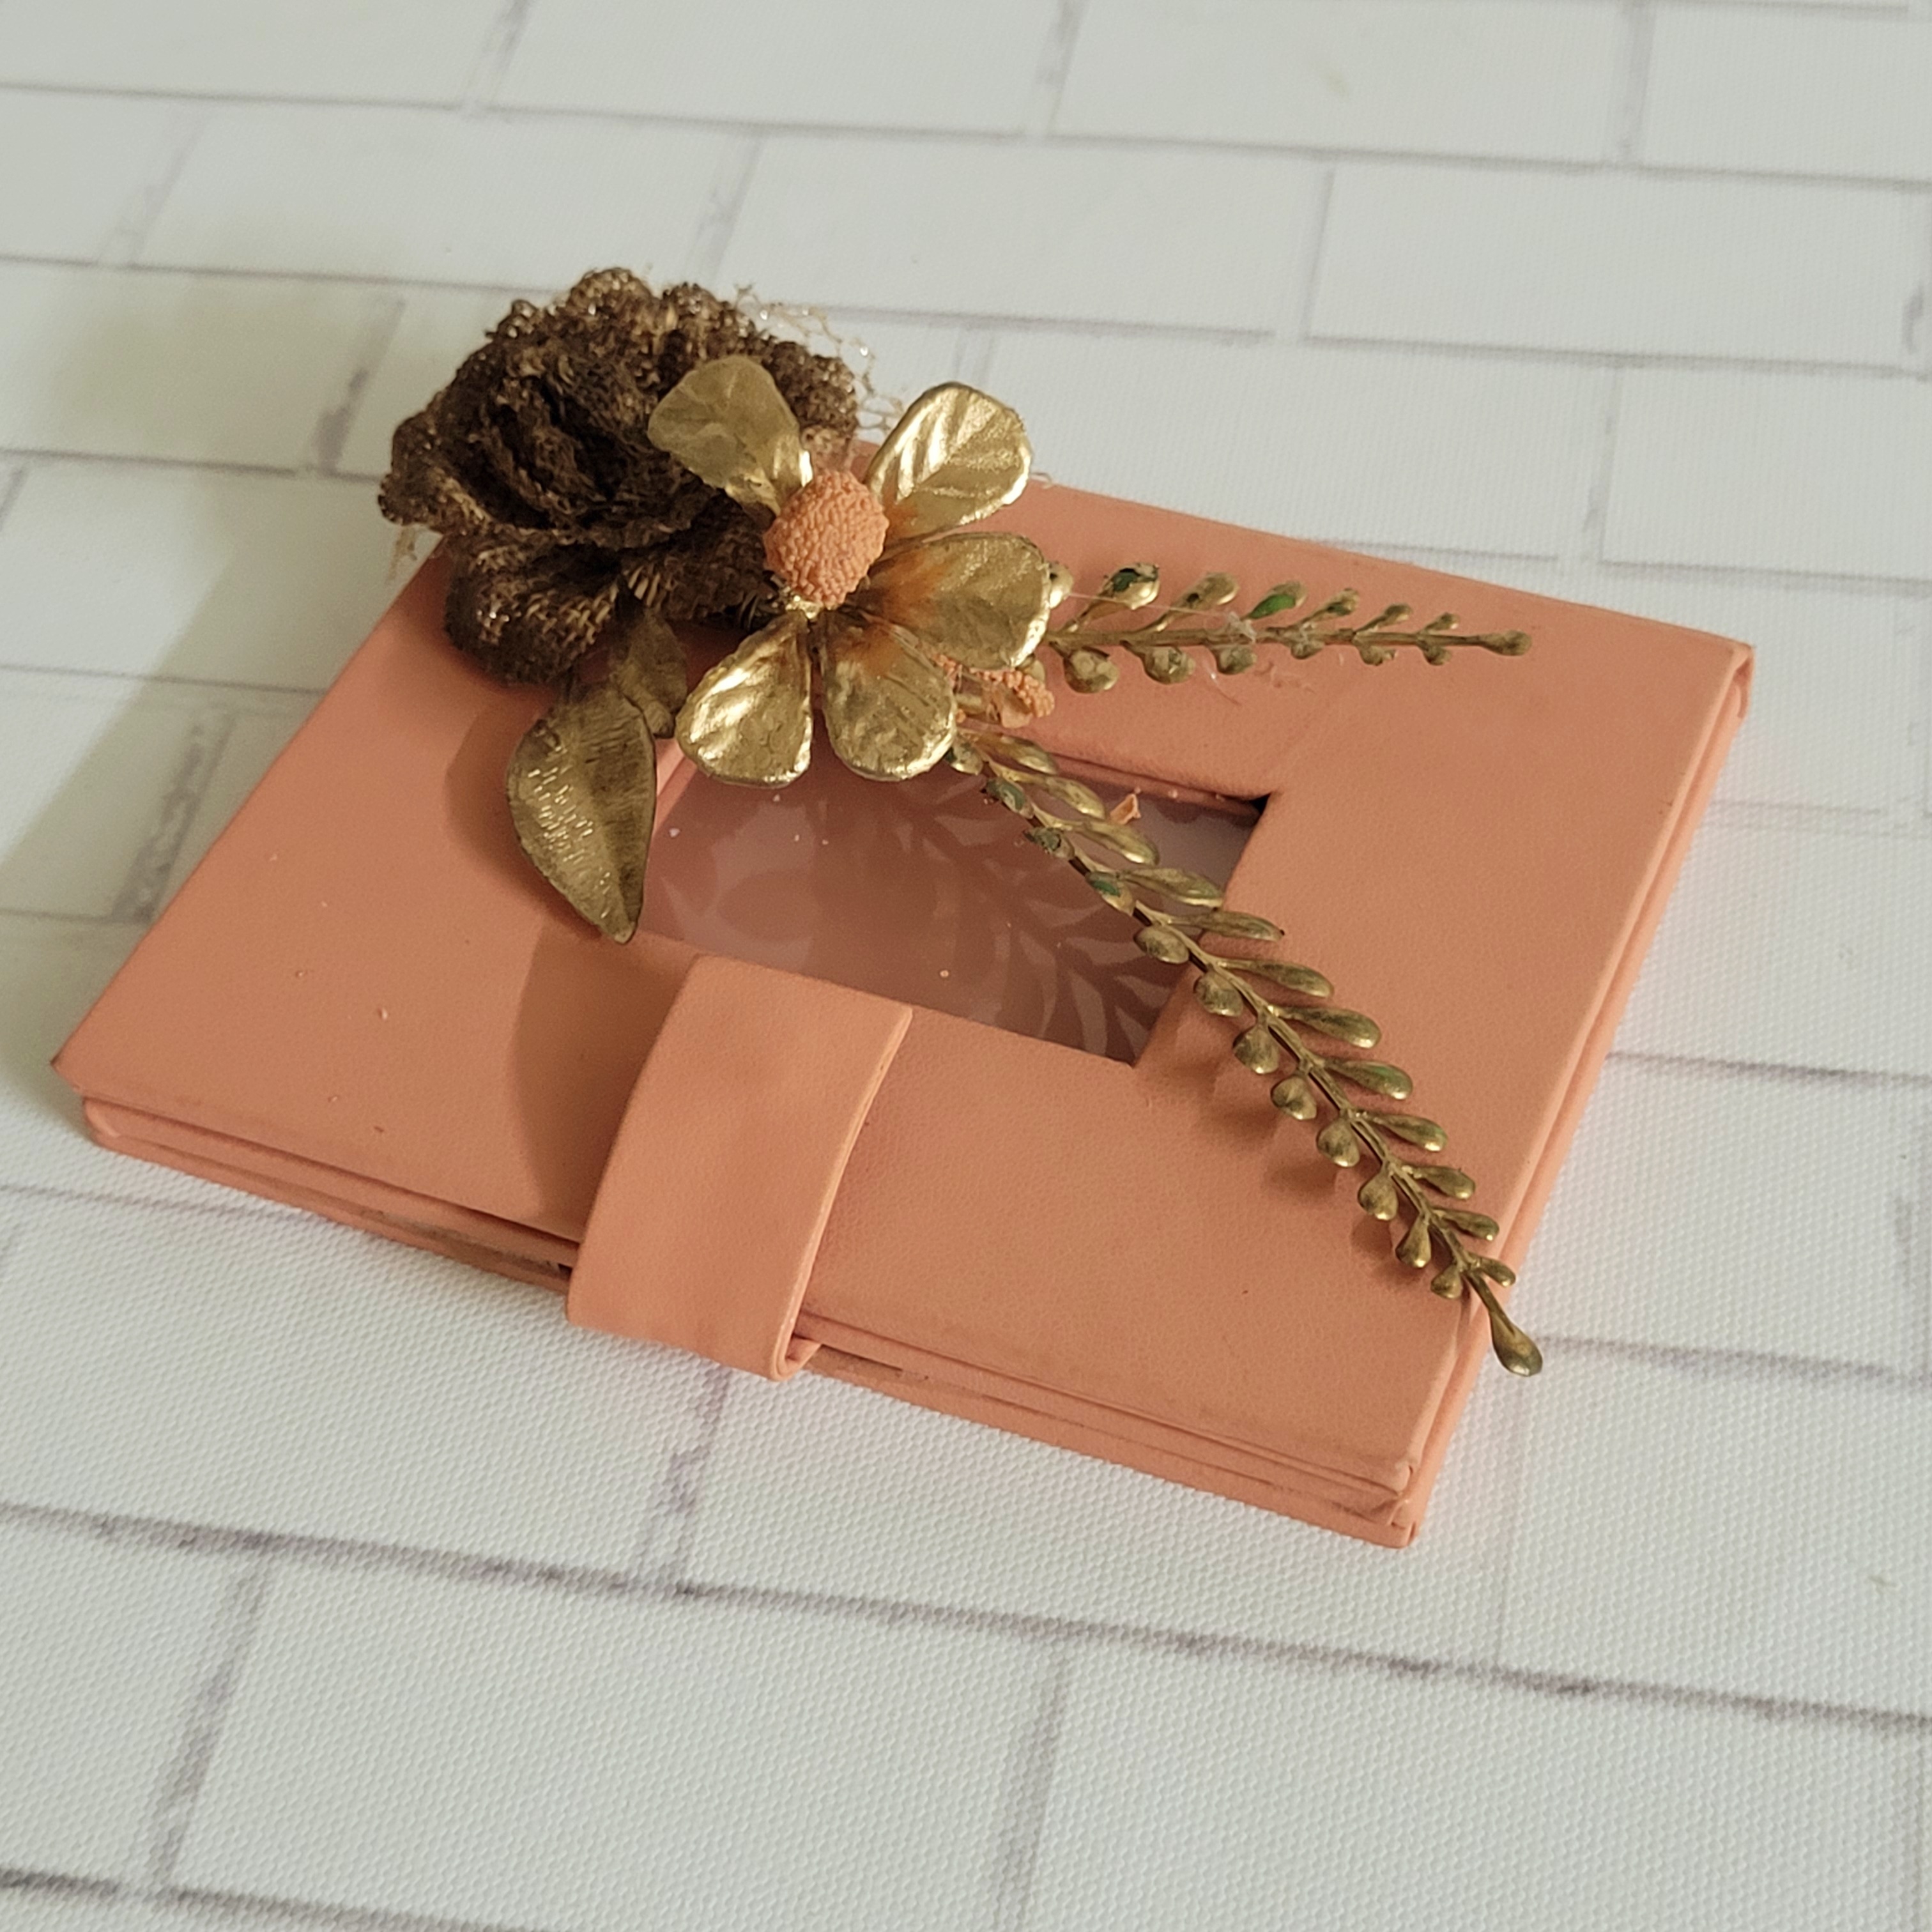 Floral art | Coral Flap Box Leather Stuff with Artifical Flower undefined